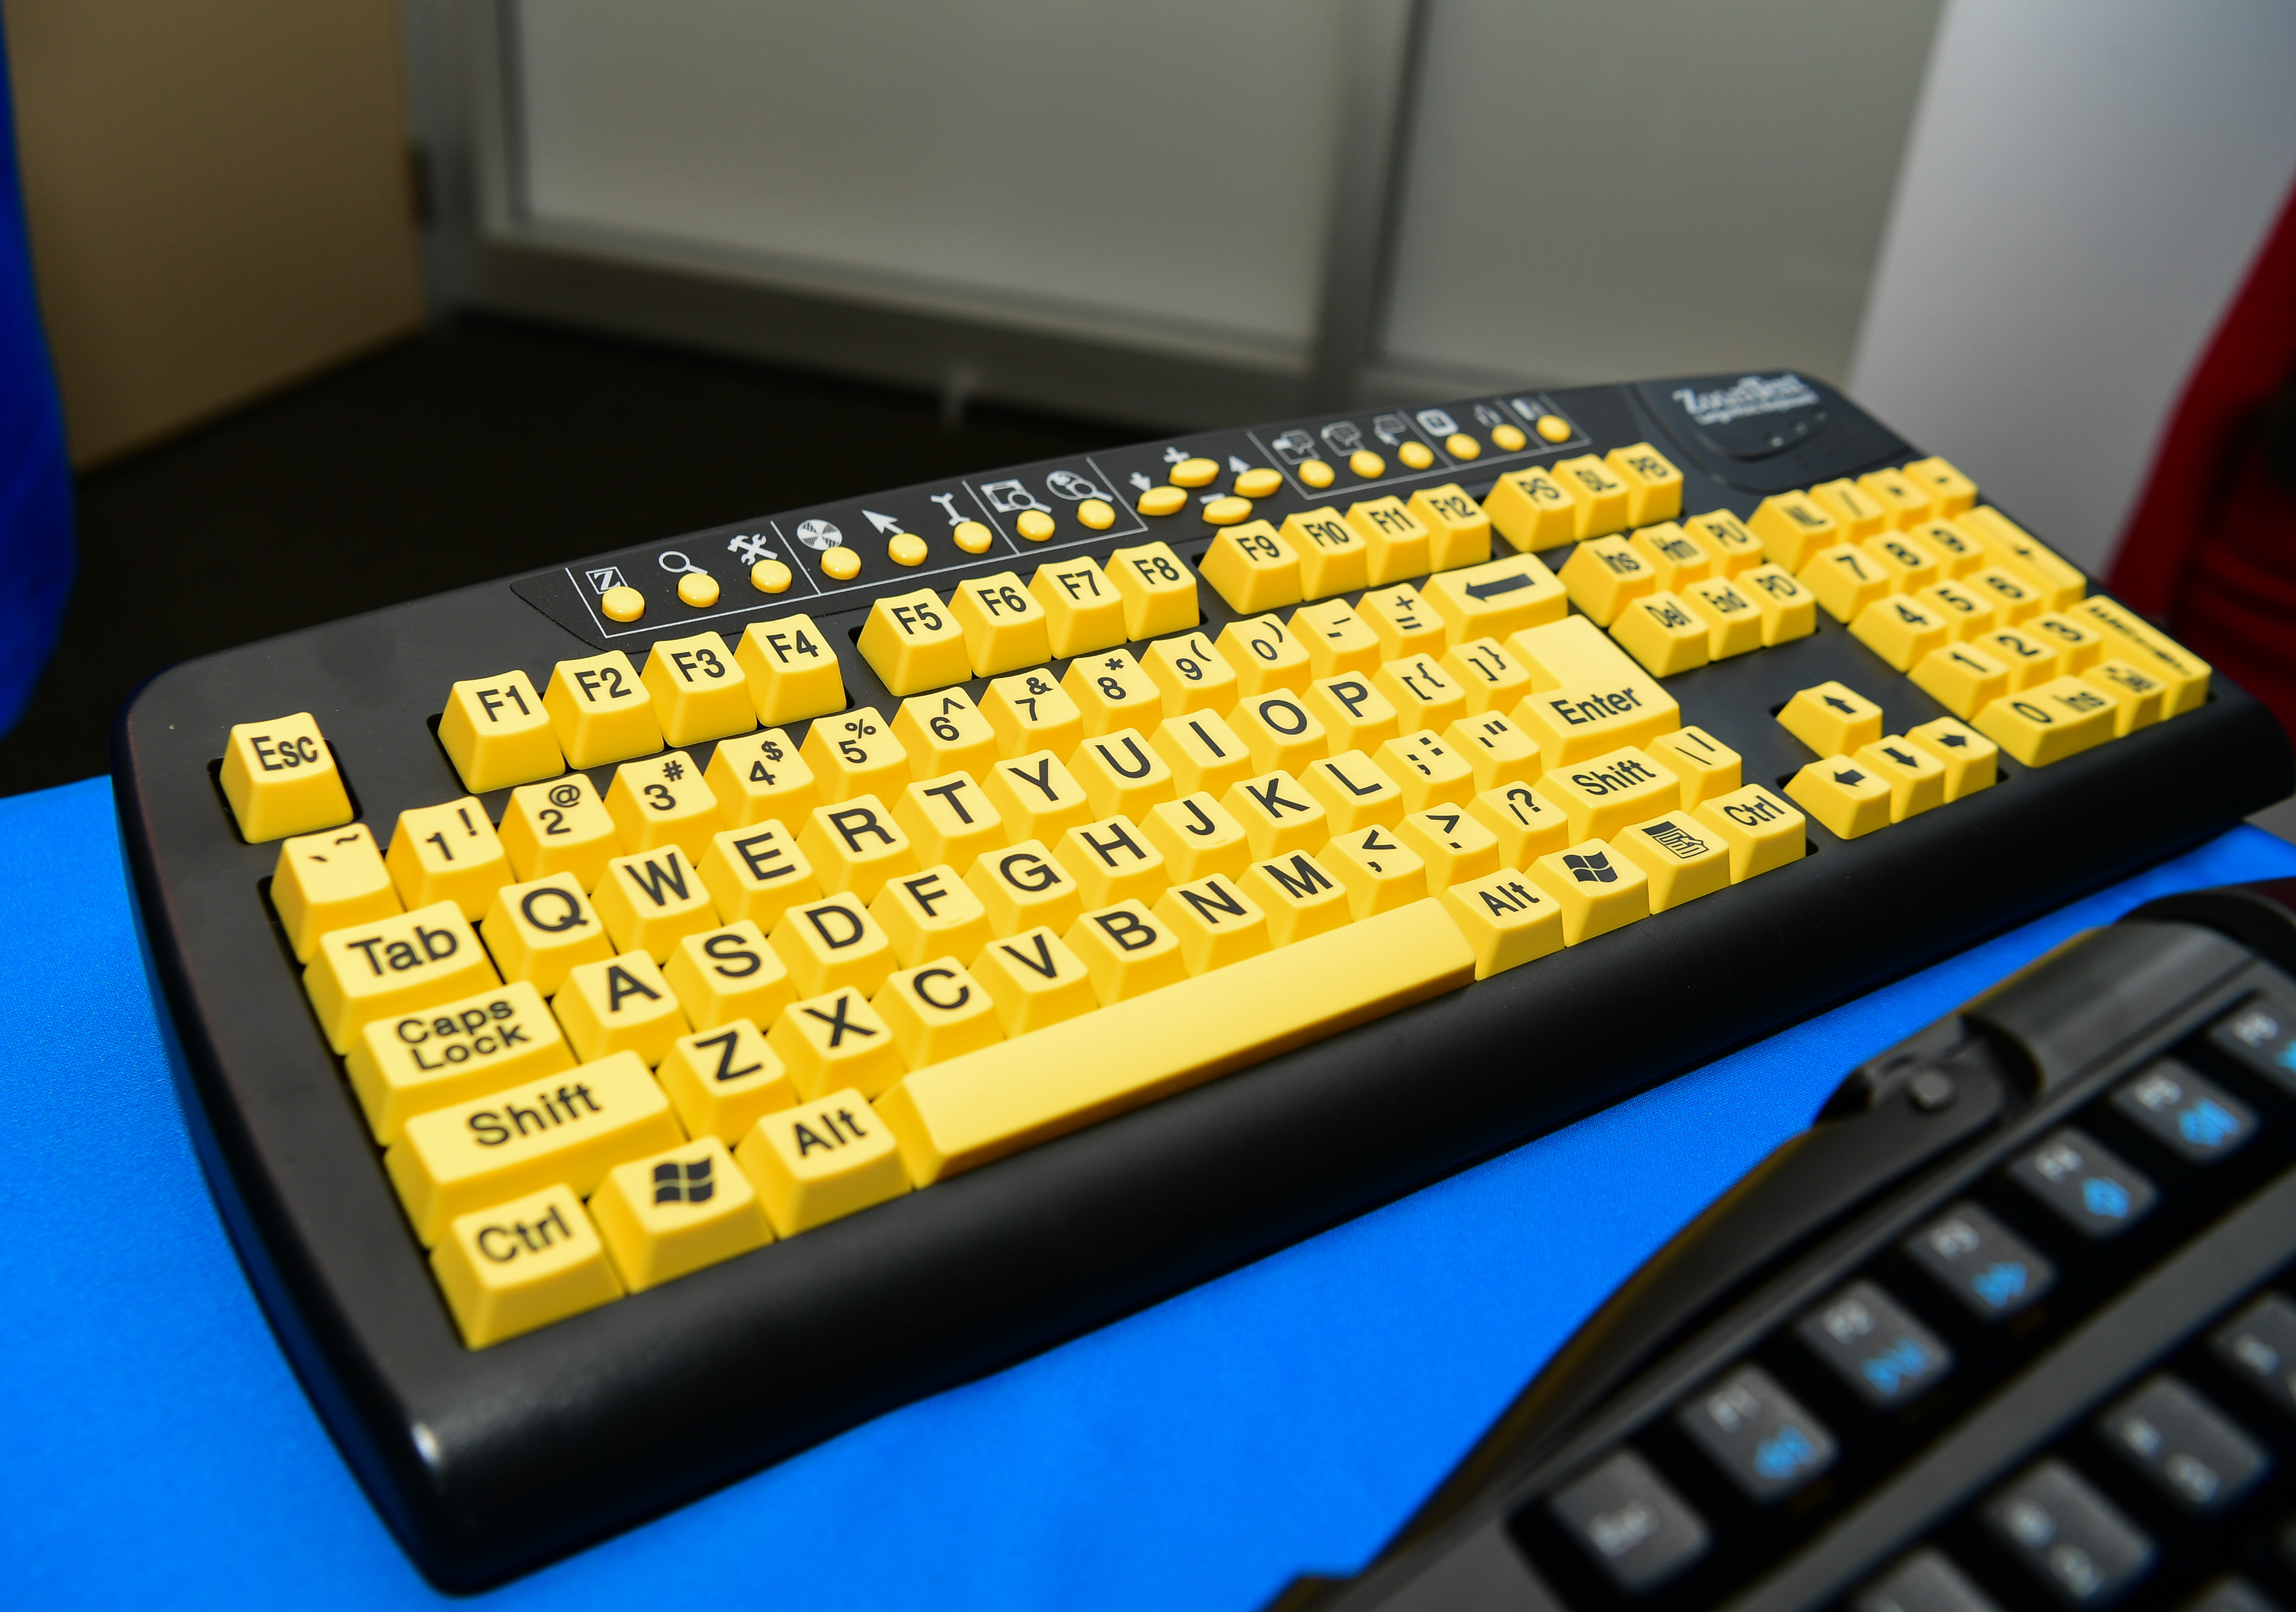 Photo of an assistive technology keyboard that is designed for use by individuals with disabilities.